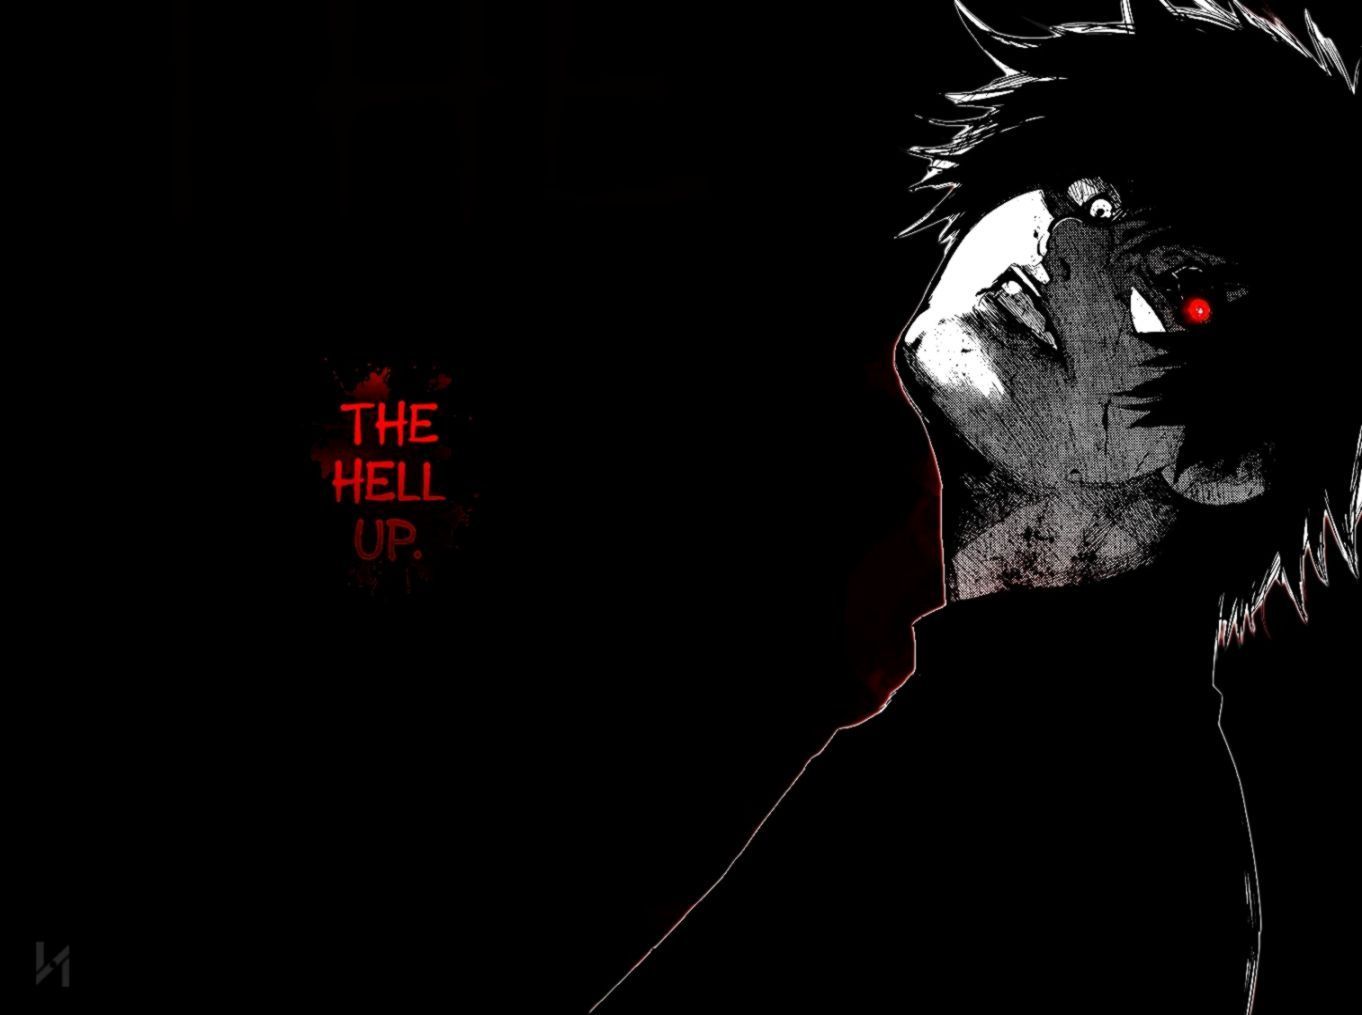 Tokyo Ghoul Black and White Wallpaper .wallpaperaccess.com